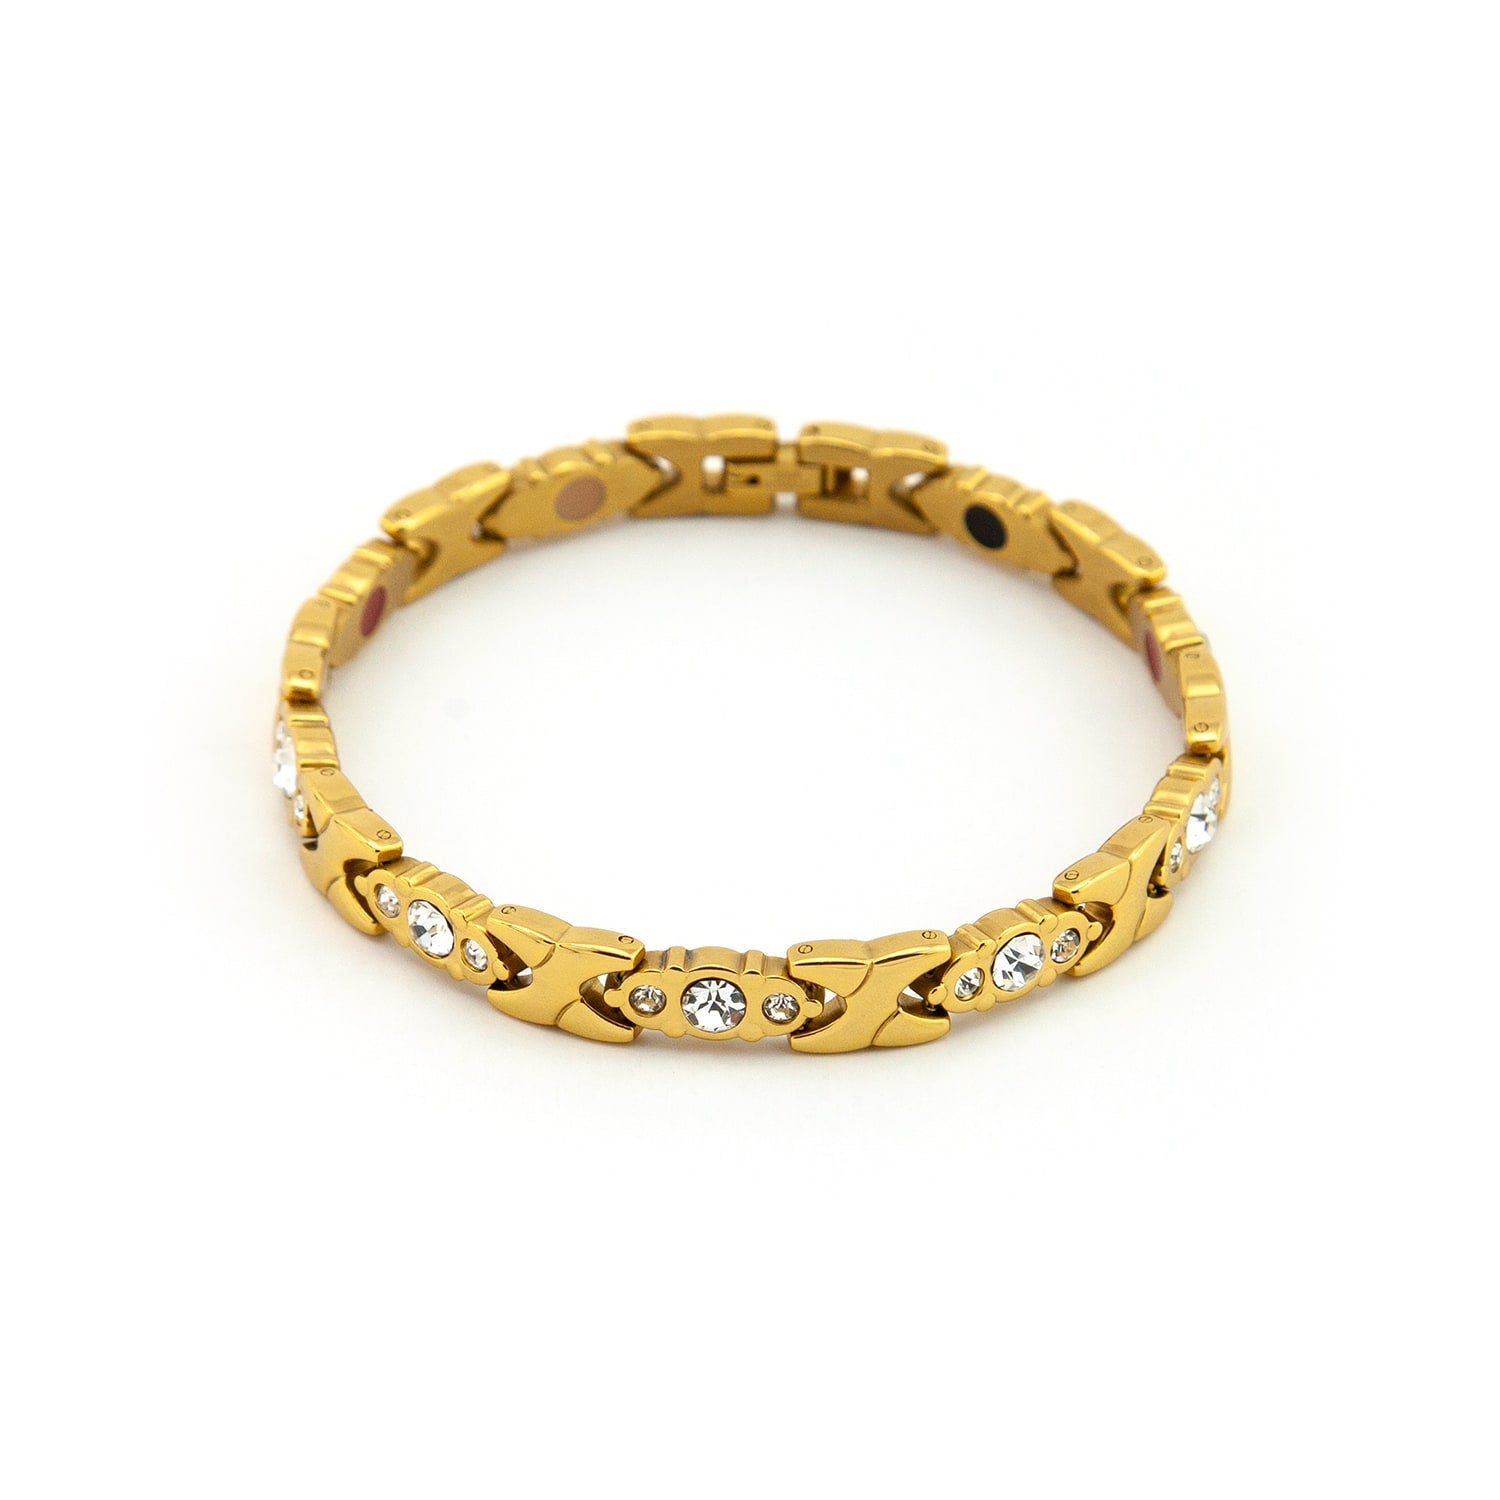 Goldie - Stainless Steel Negative Ion Bracelet, Gold Plated with Swarovski Crystals